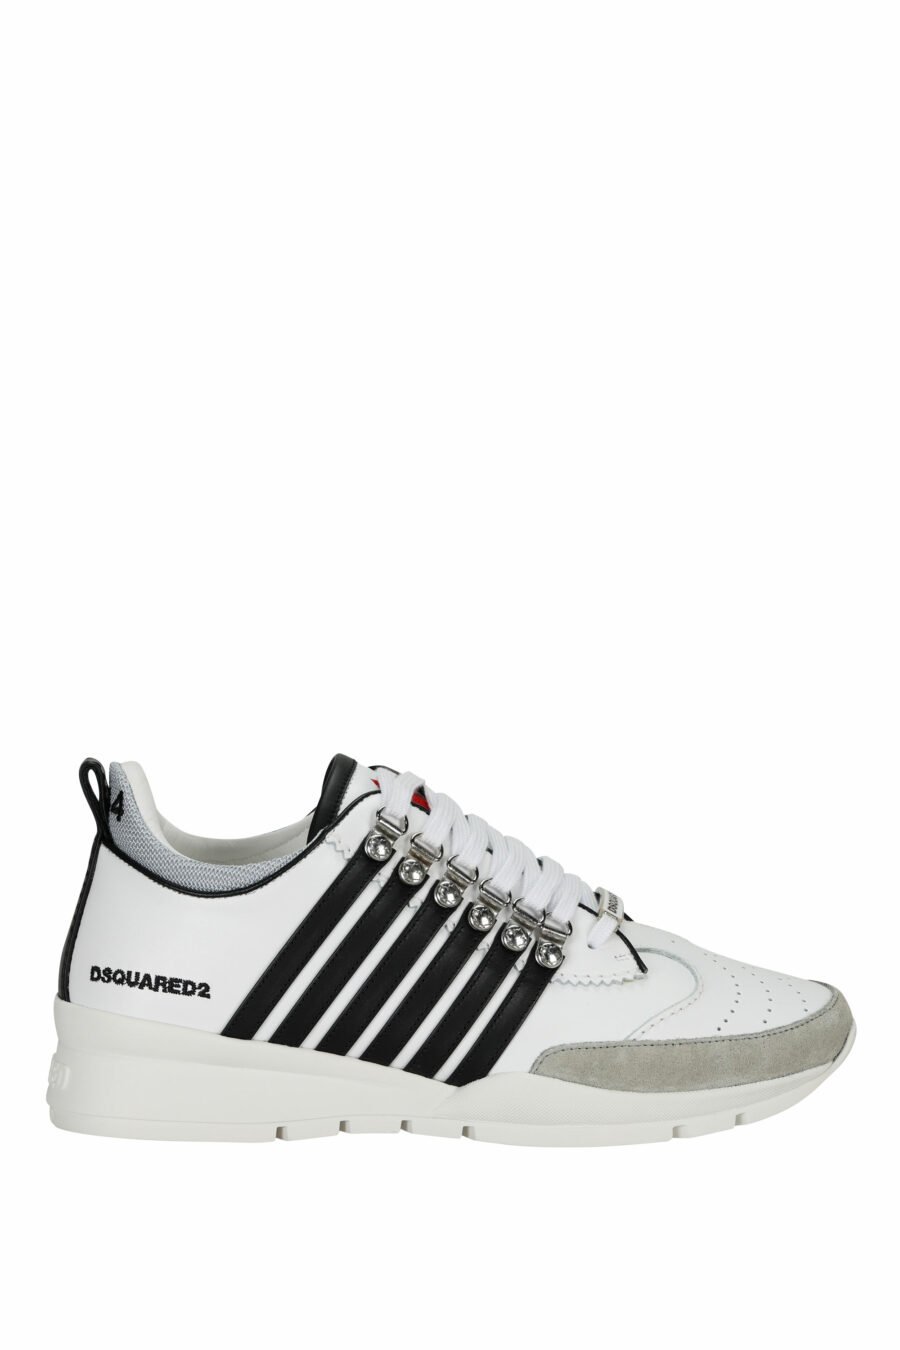 White trainers "legendary" with black stripes - 8055777300930